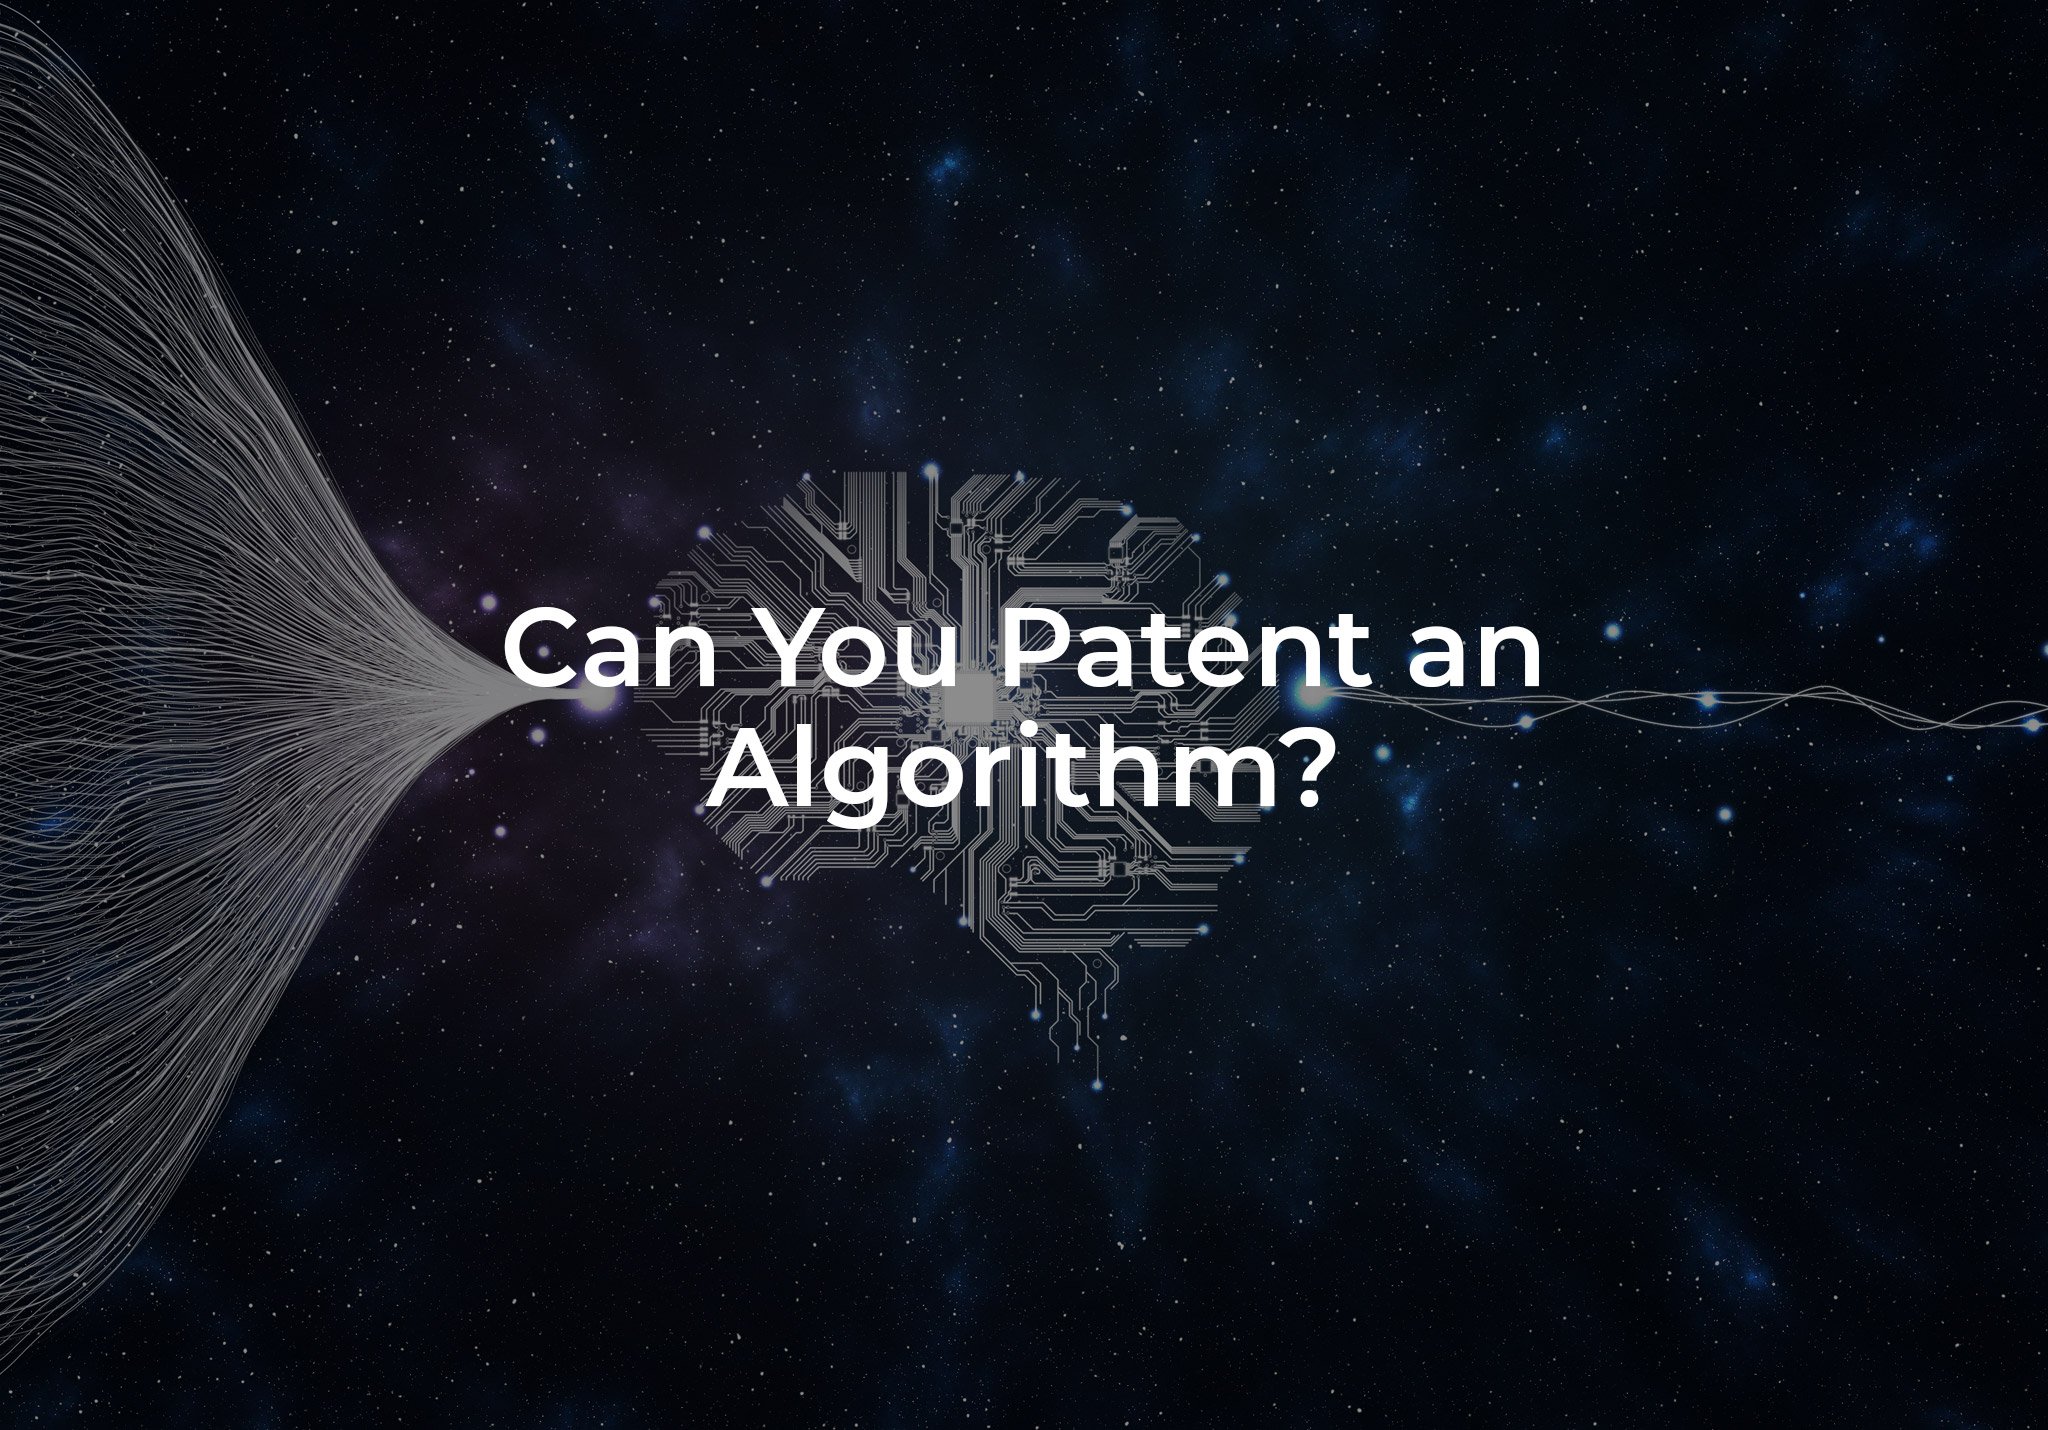 Can You Patent an Algorithm?